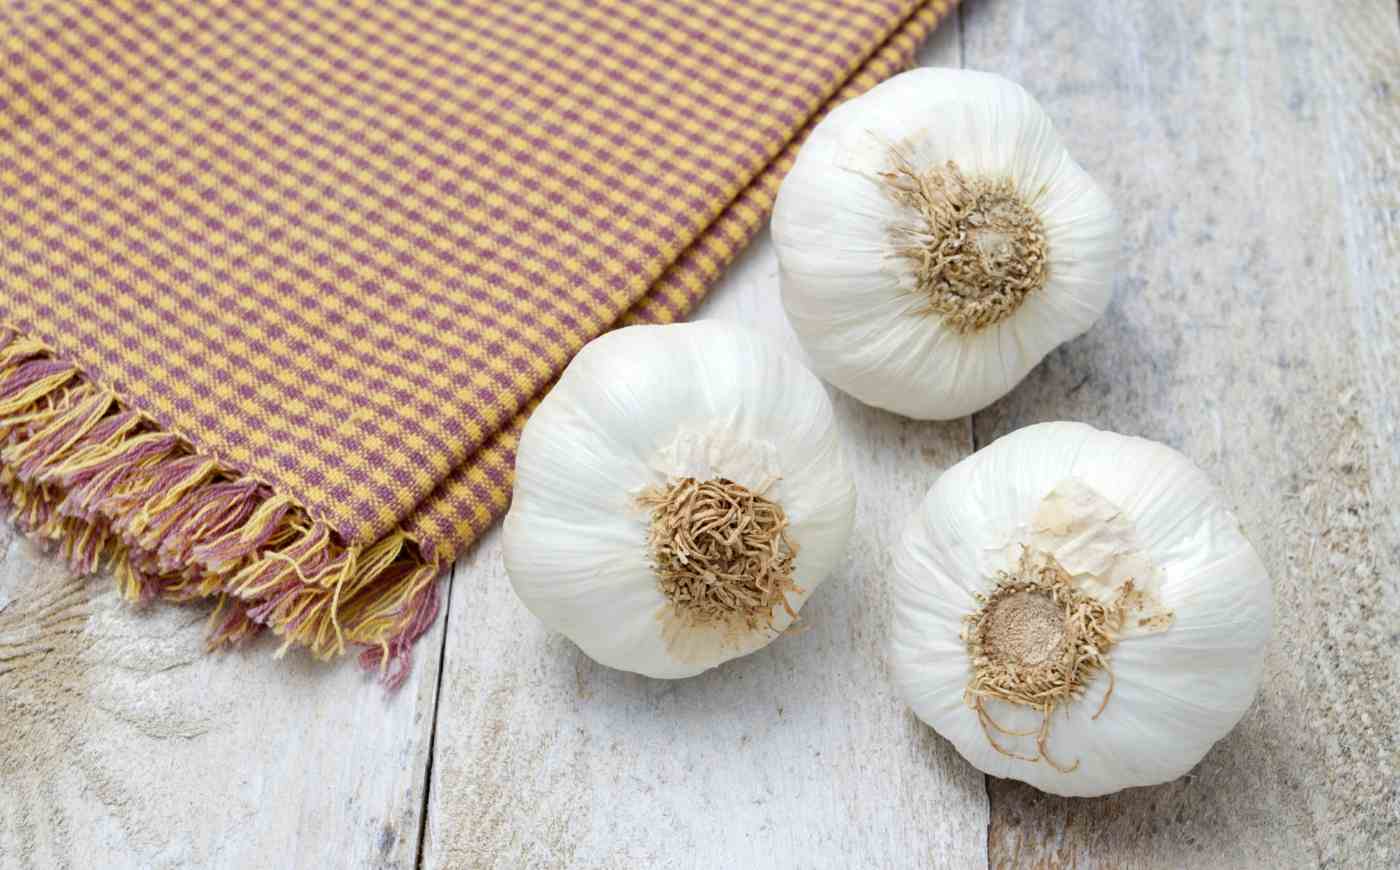 Garlic acts antiviral, inhibits virus reproduction and strengthens the immune system